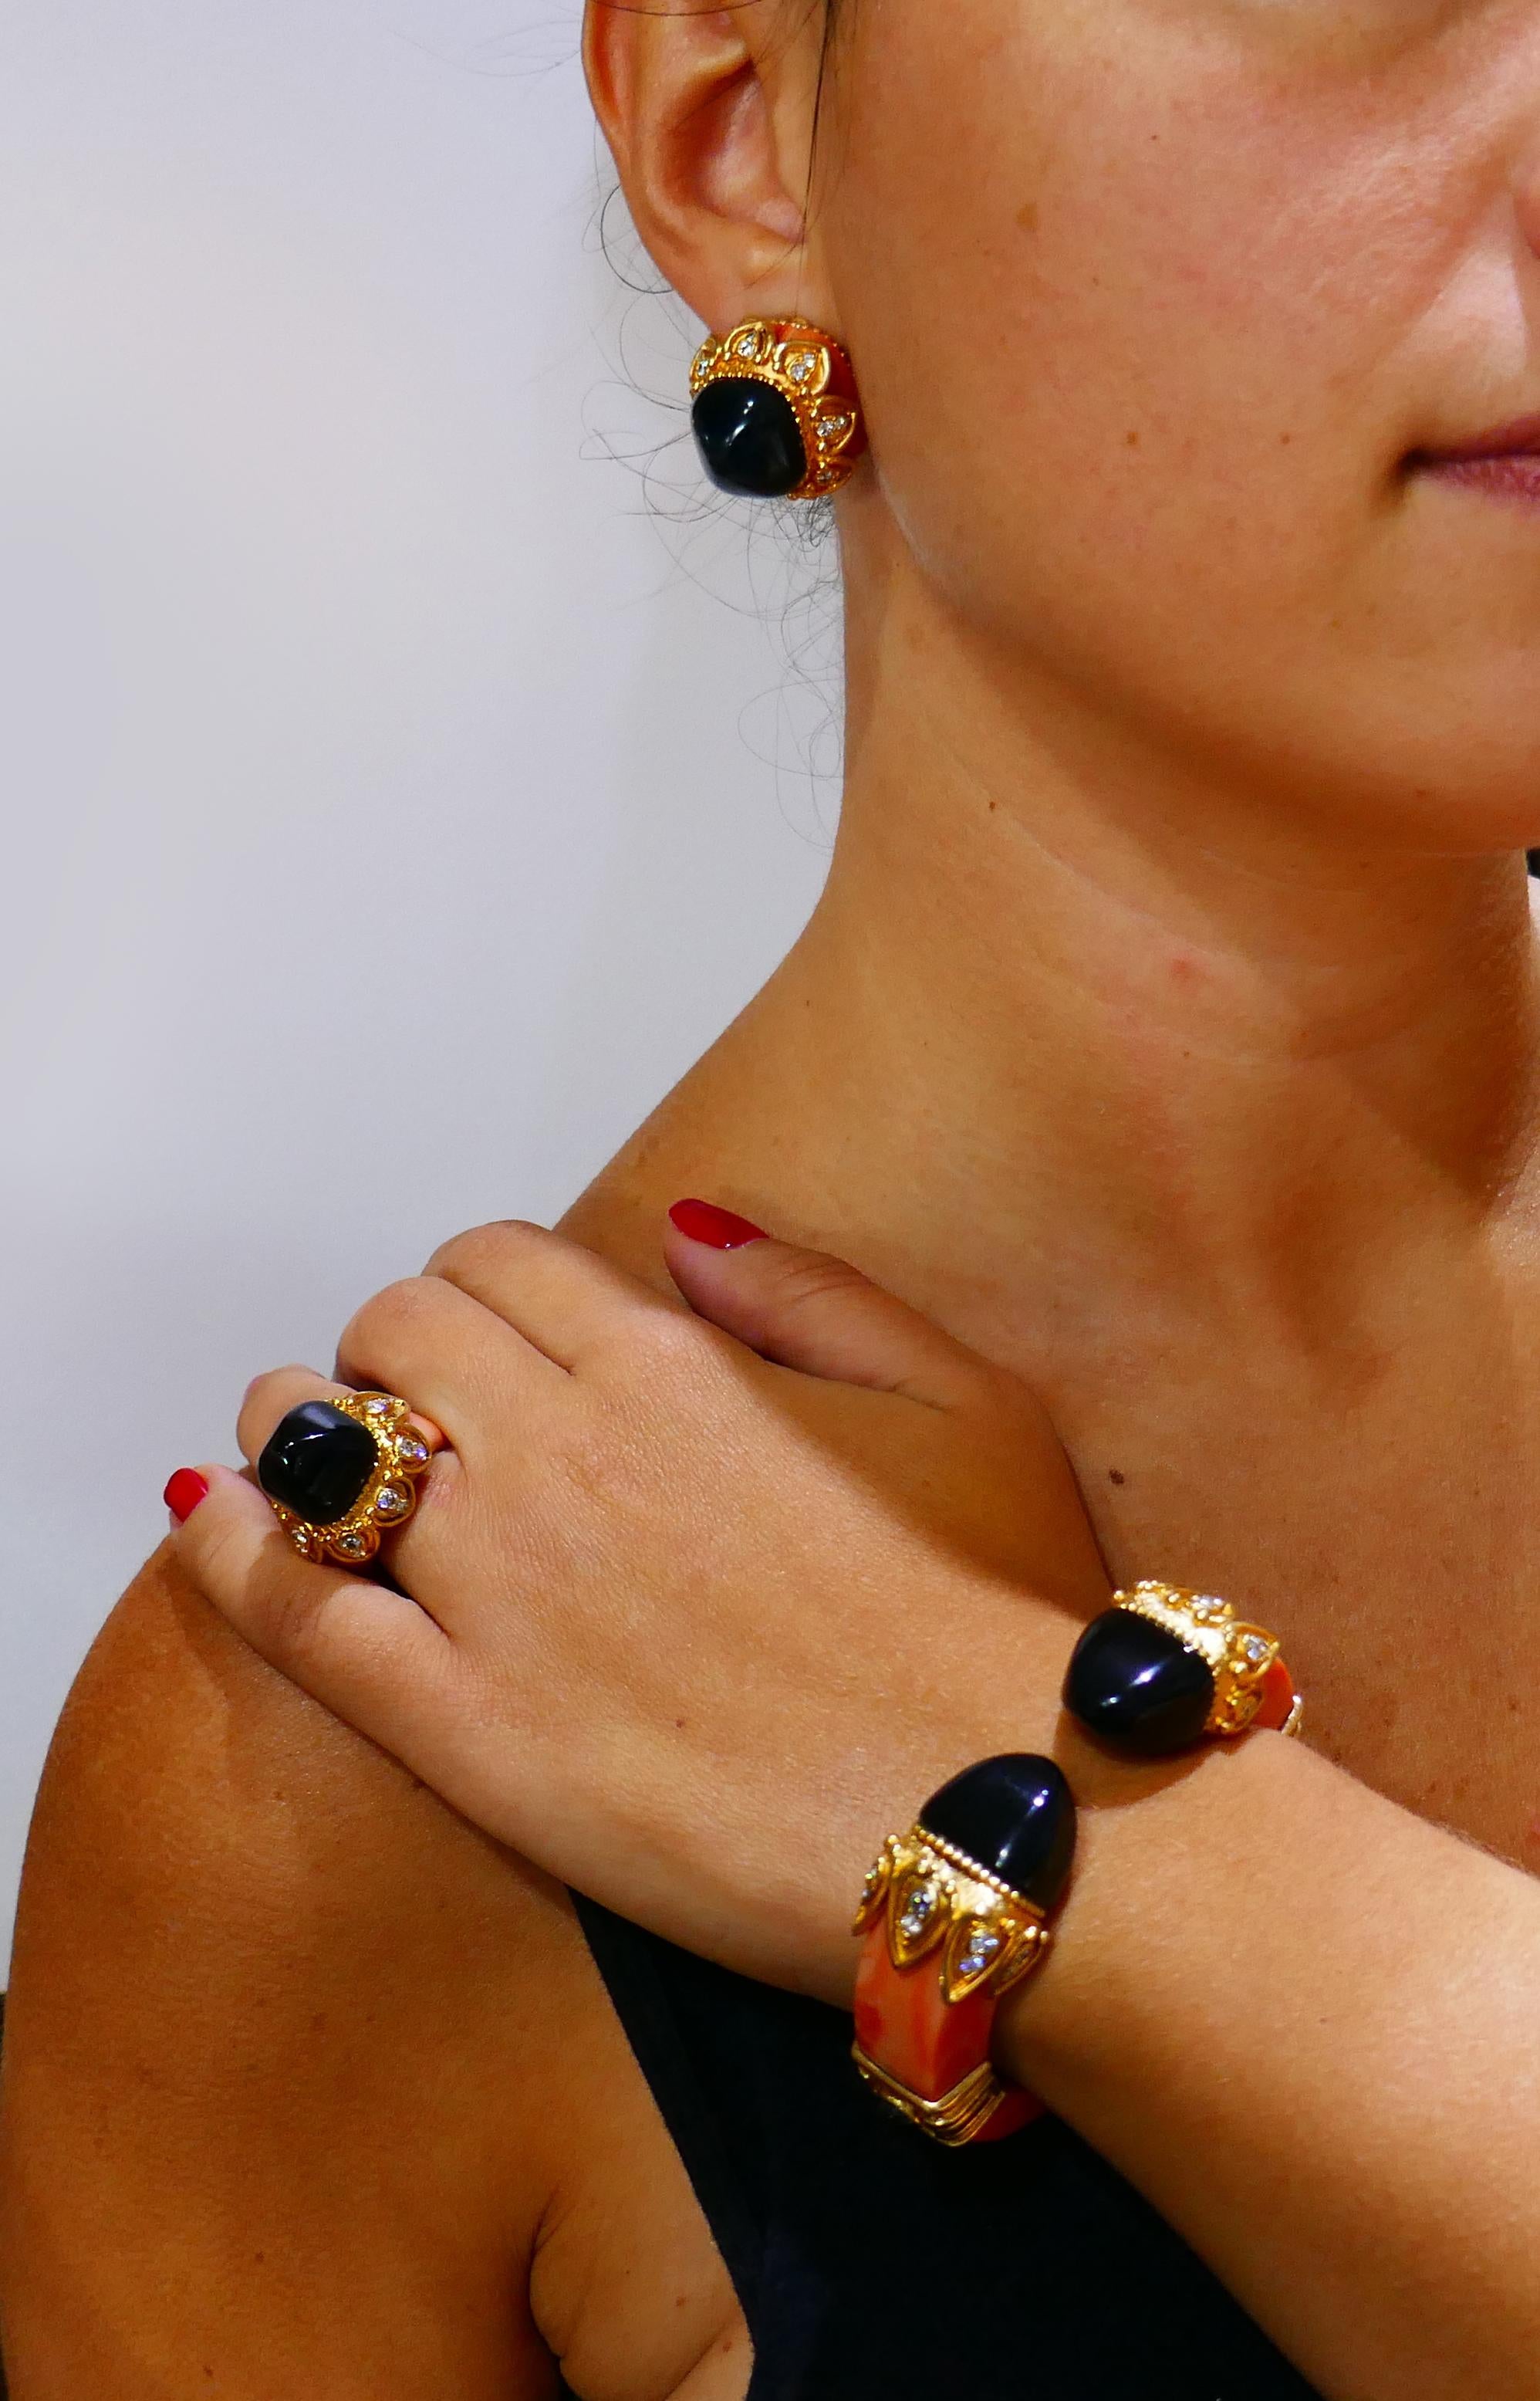 Fabulous vintage set consisting of a bangle bracelet, clip-on earrings and a ring created by Boucheron in Paris in the 1970s. 
The set is made of 18 karat yellow gold, coral, black onyx and sprinkled with round brilliant cut diamonds (G-H color, VS